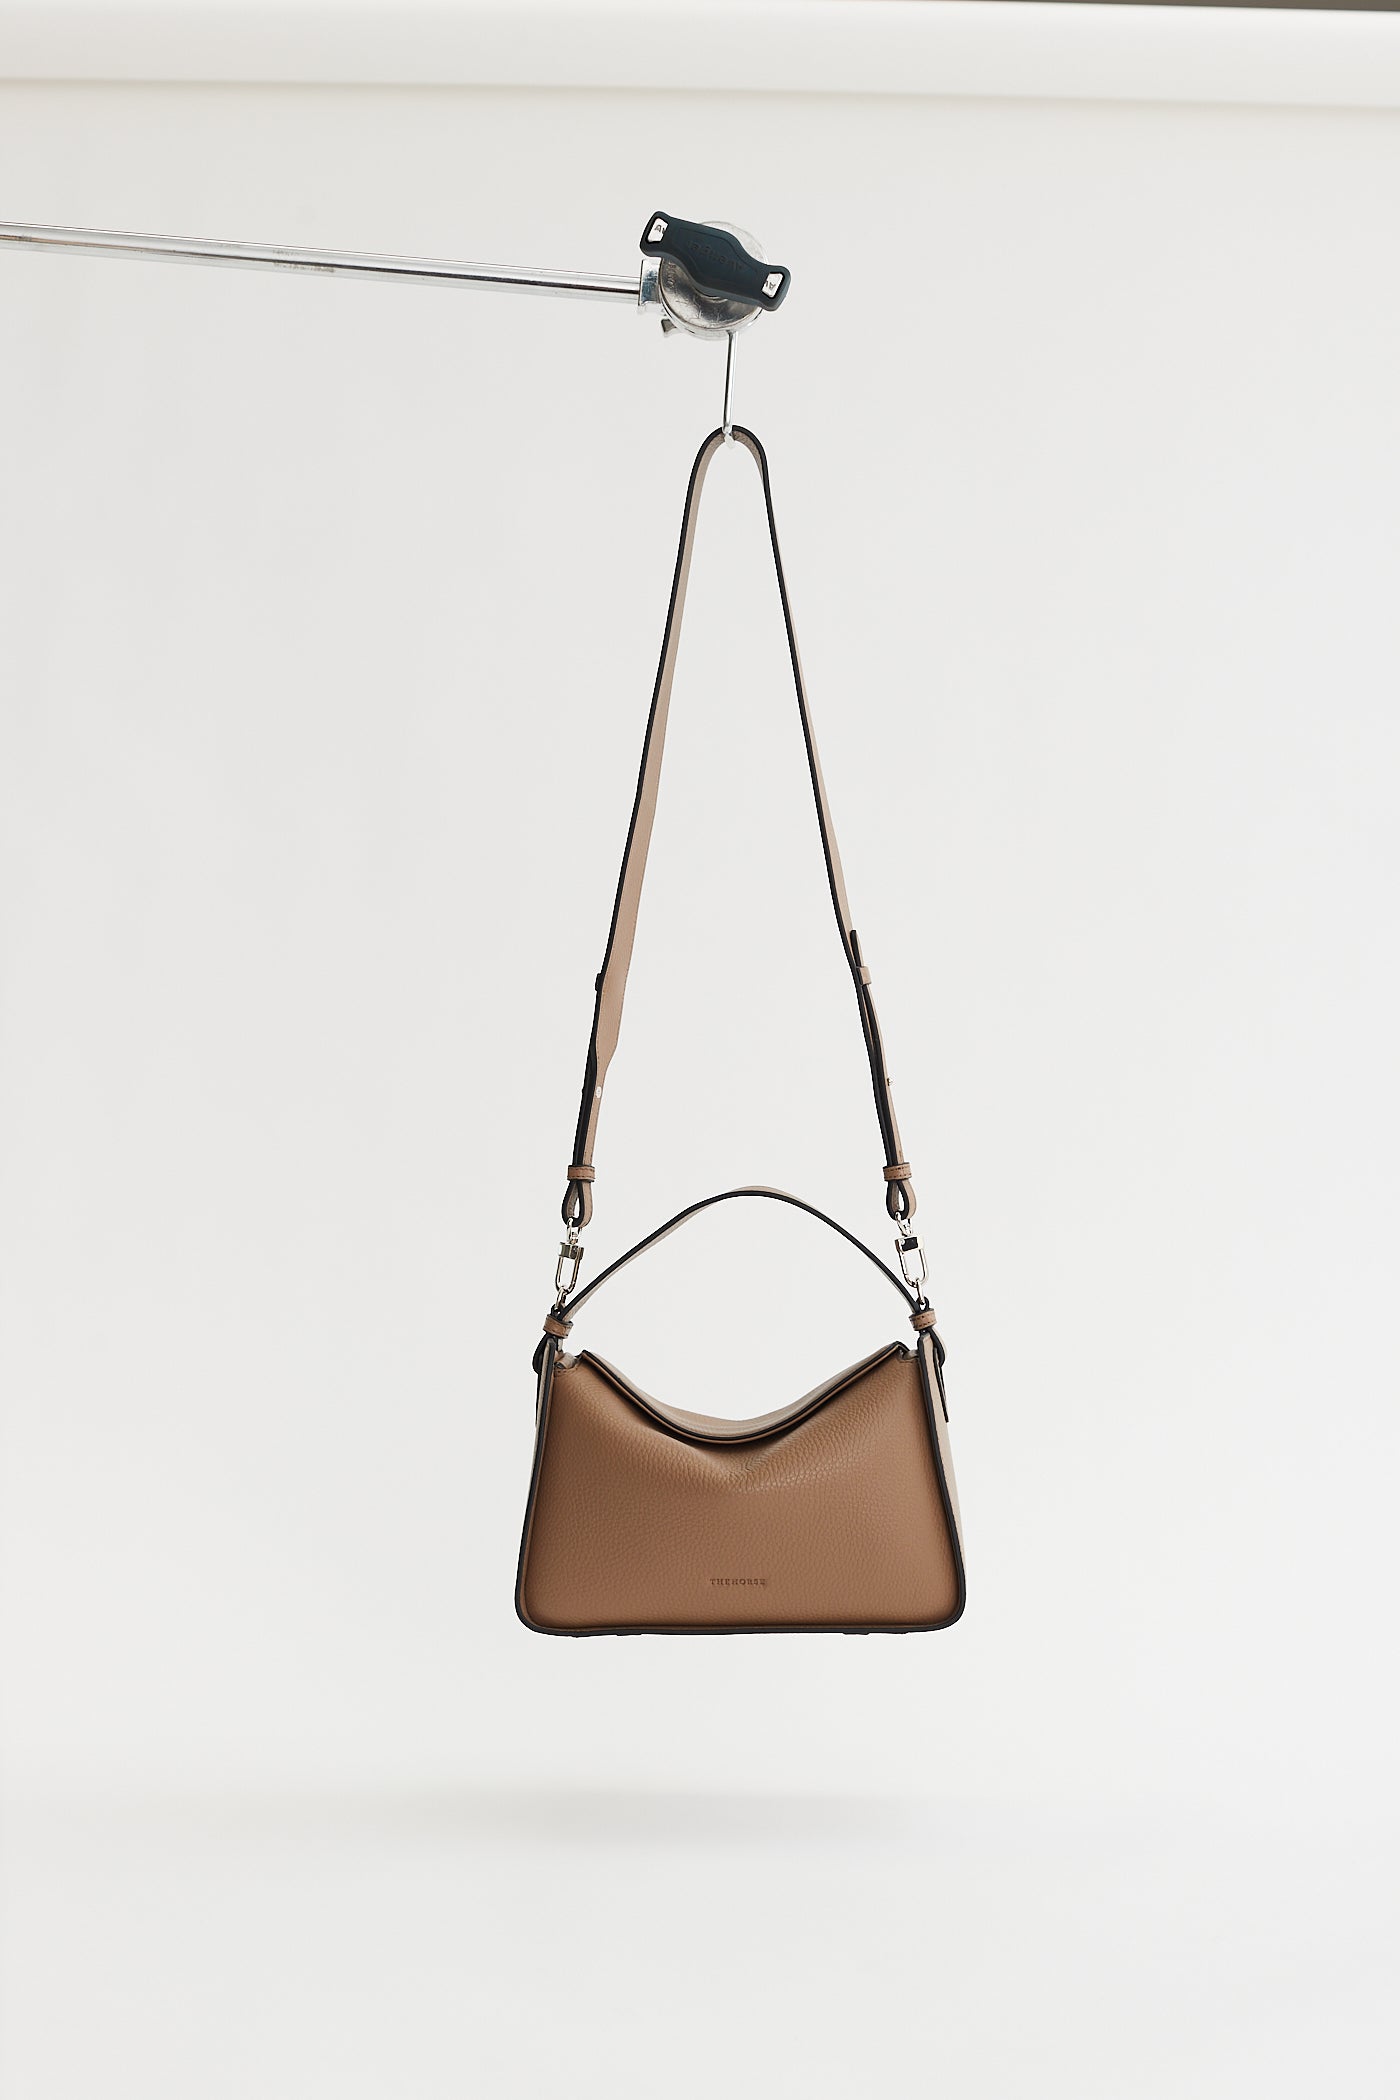 Clementine Bag: Taupe Pebbled Leather